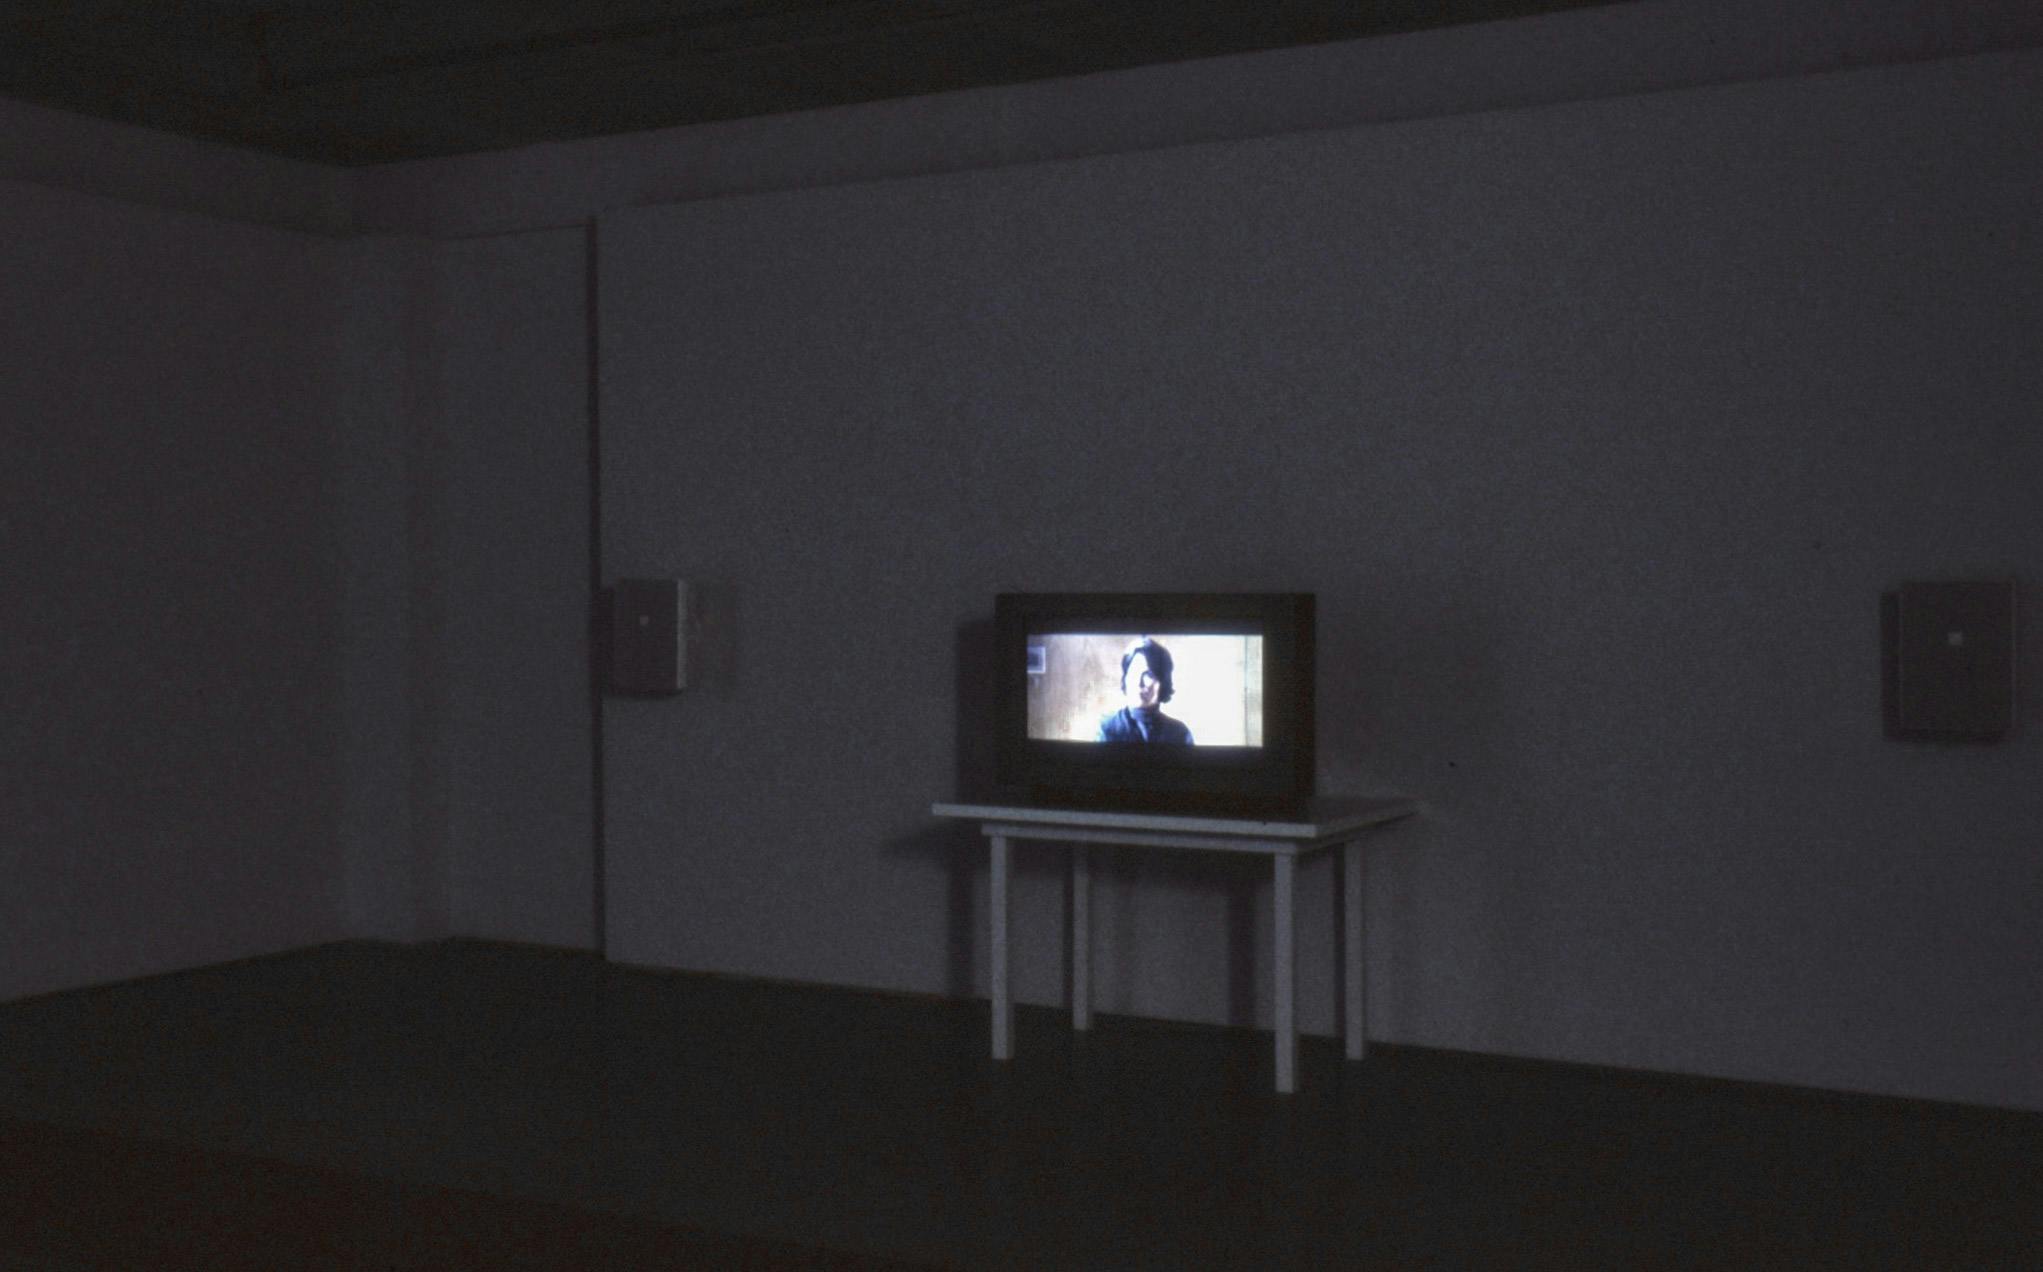 A CTR TV is placed on a white table in a darkened gallery space. A single-channel video is played on the TV. The video shows the head of a person talking directly to the camera. 